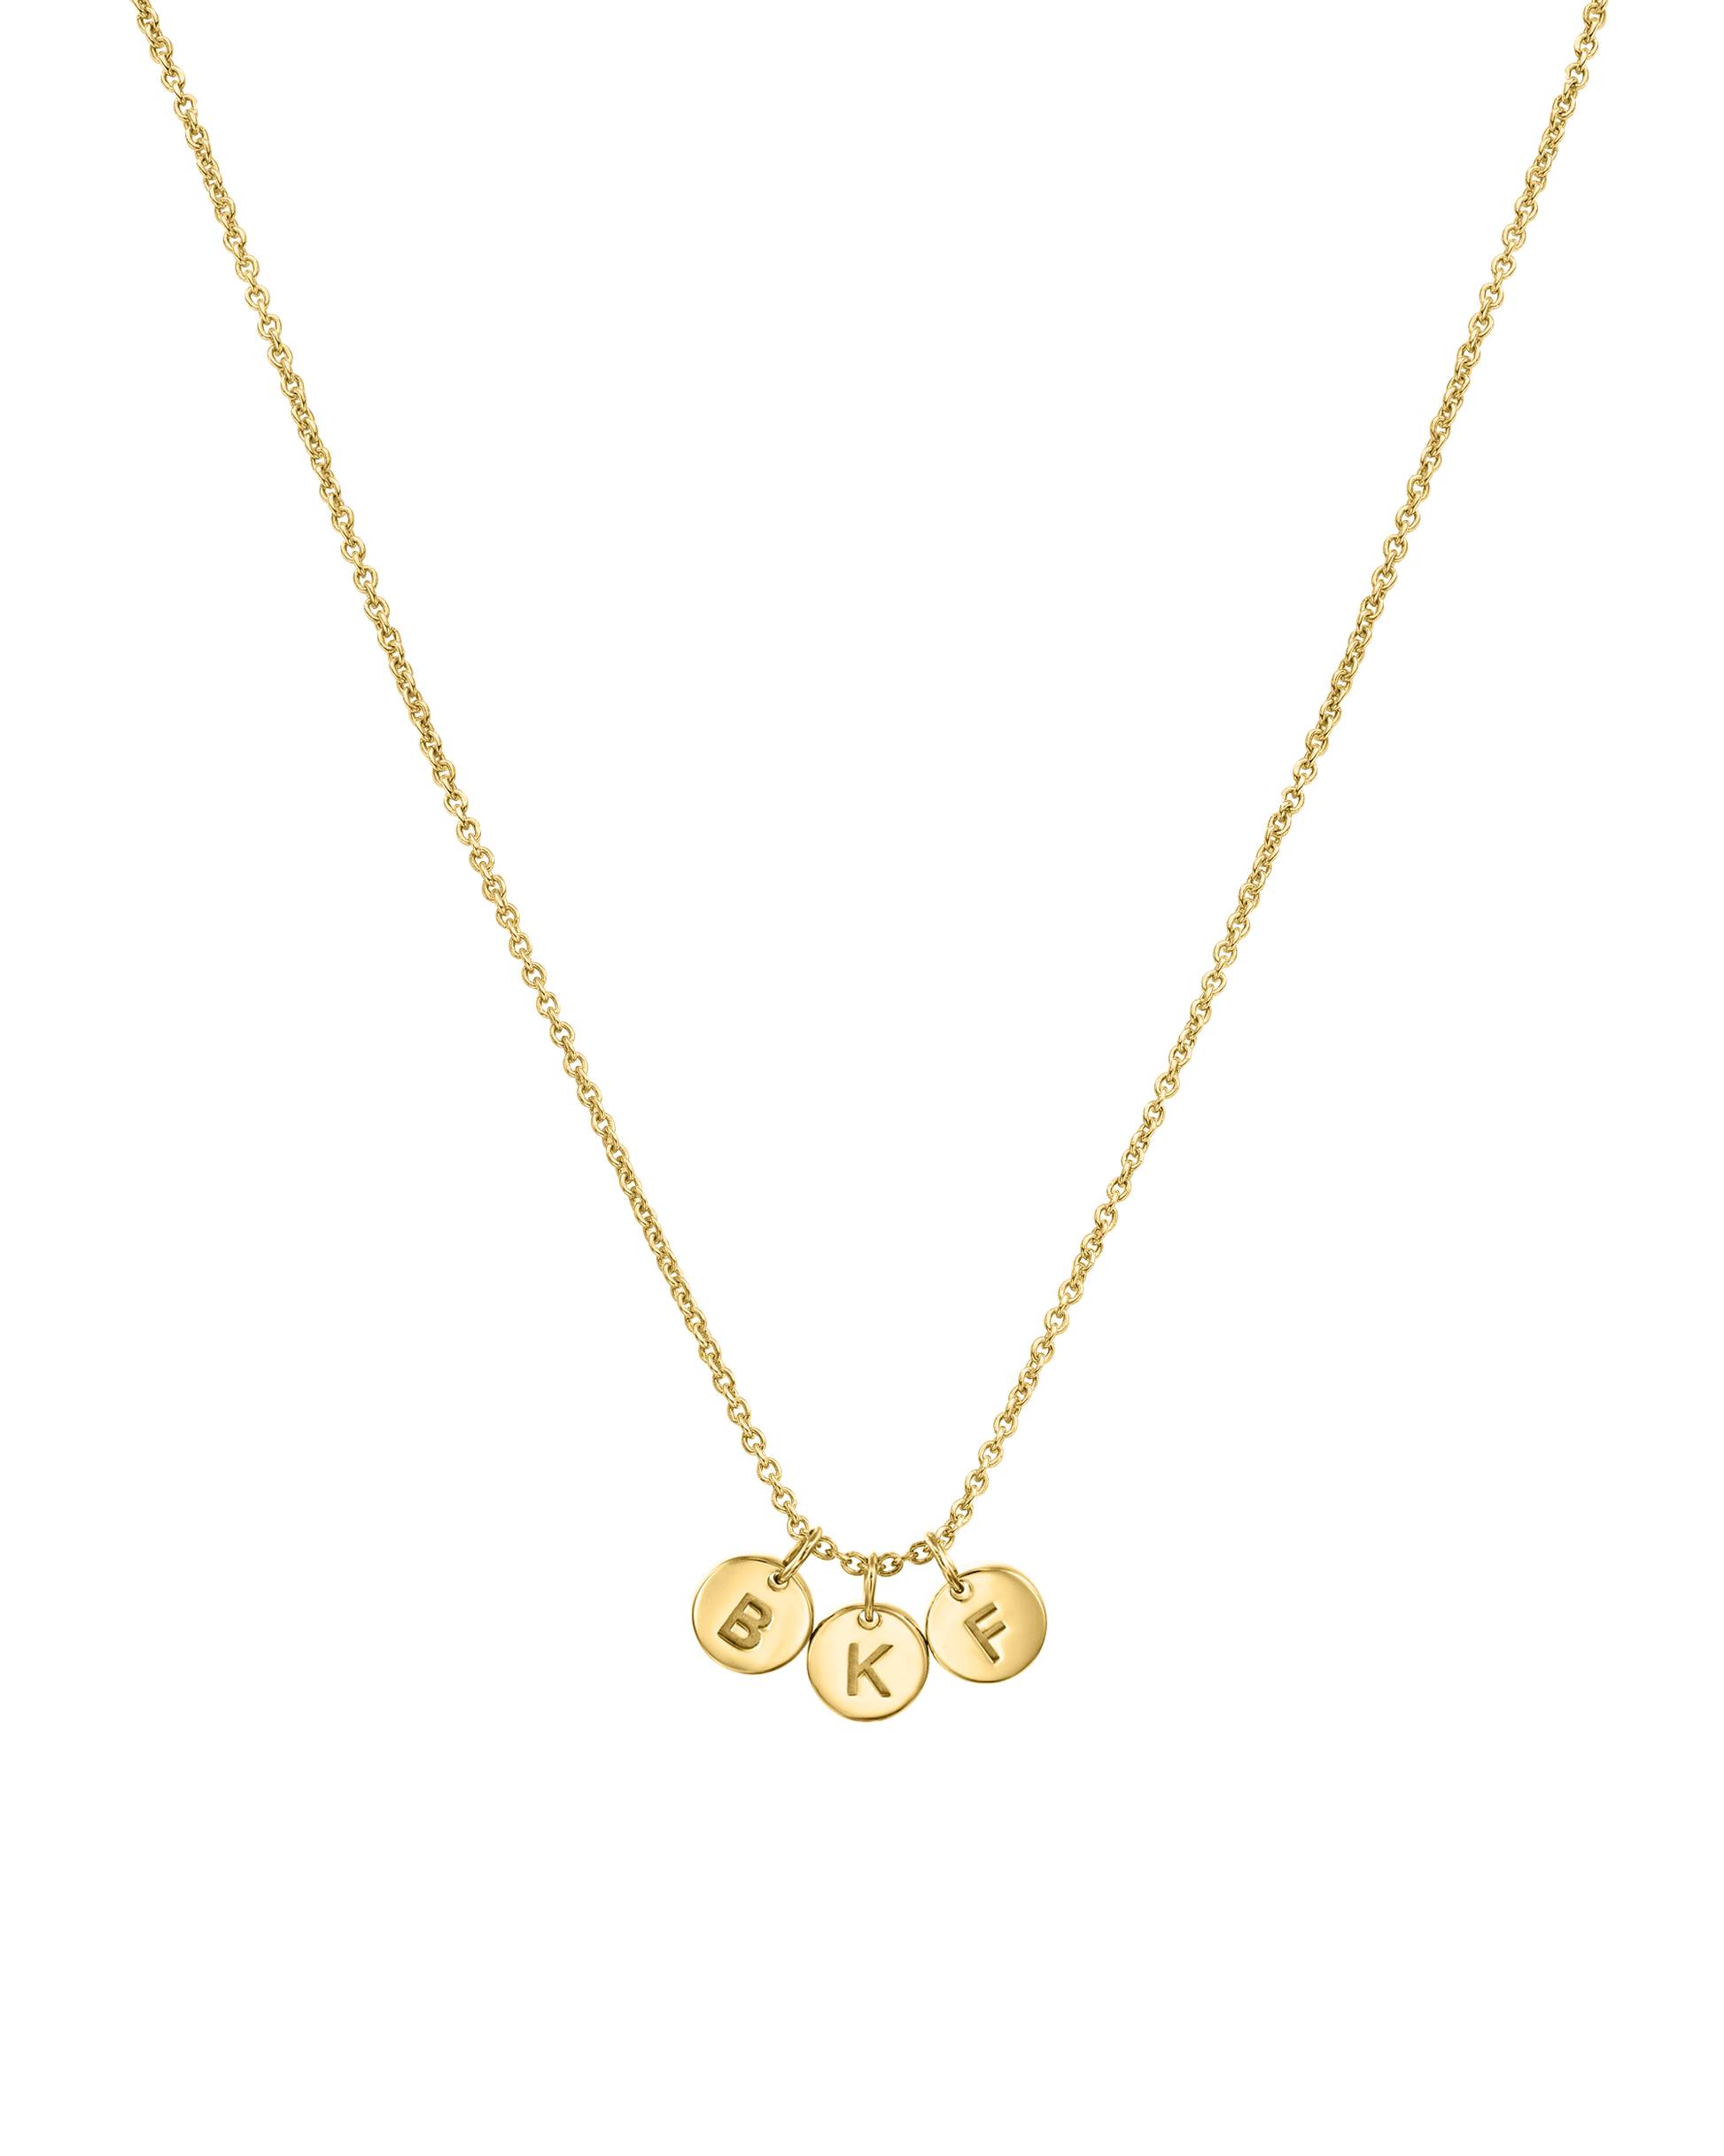 Tiny Initial Disc Necklace - 18K Gold Vermeil Necklaces magal-dev 1 Initial 16" 